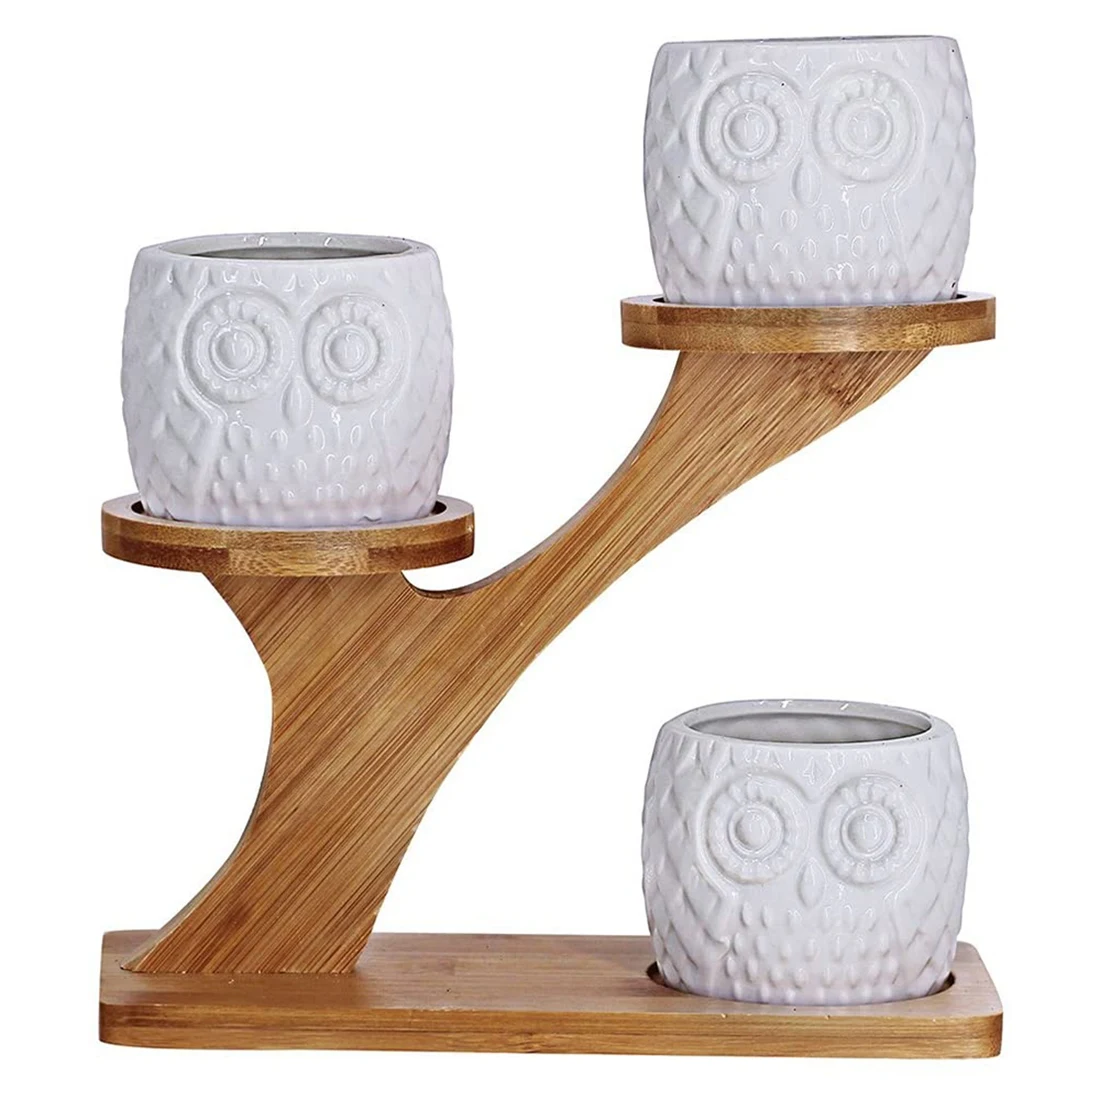 

3 Pieces Of Owl Succulent Flower Pot With 3-Layer Bamboo Dish Holder-White Modern Decorative Ceramic Flower Pot